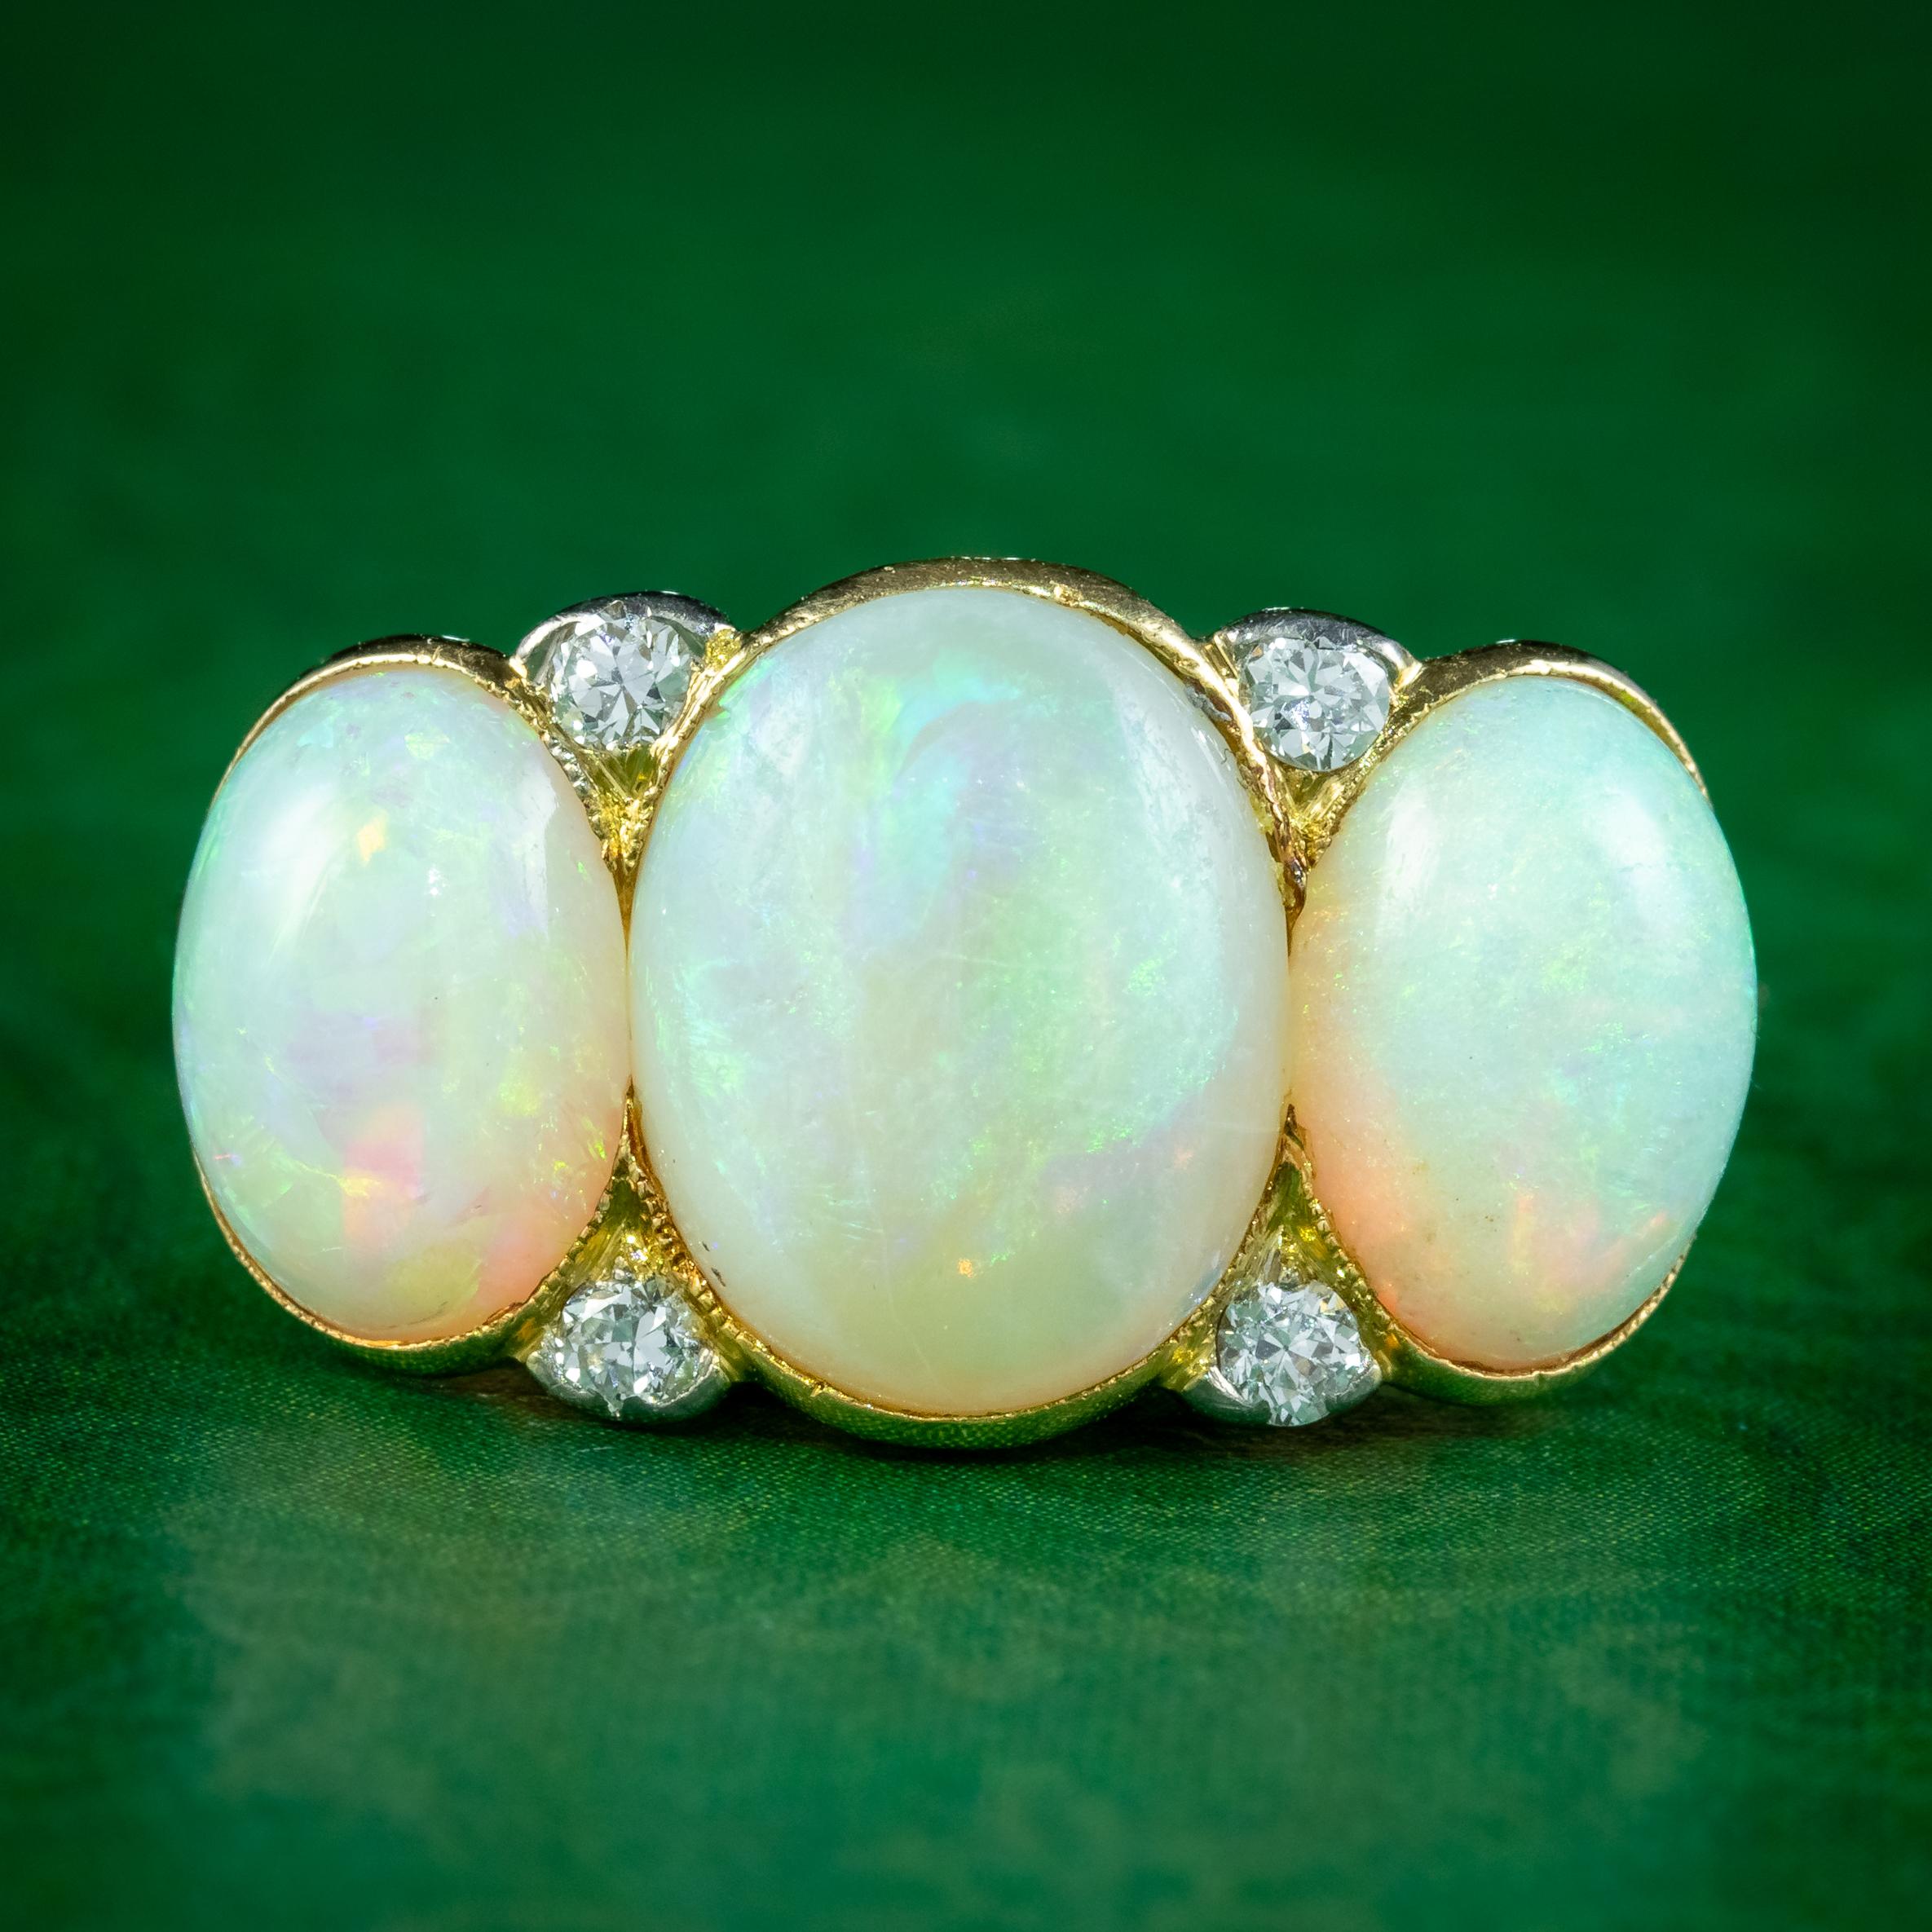 A magnificent antique Edwardian ring adorned with a trilogy of natural opal cabochons displaying a kaleidoscope of vibrant colours that dance across the surface. They weigh approx. 3.5ct in the centre and 1.75ct on either side with four twinkling